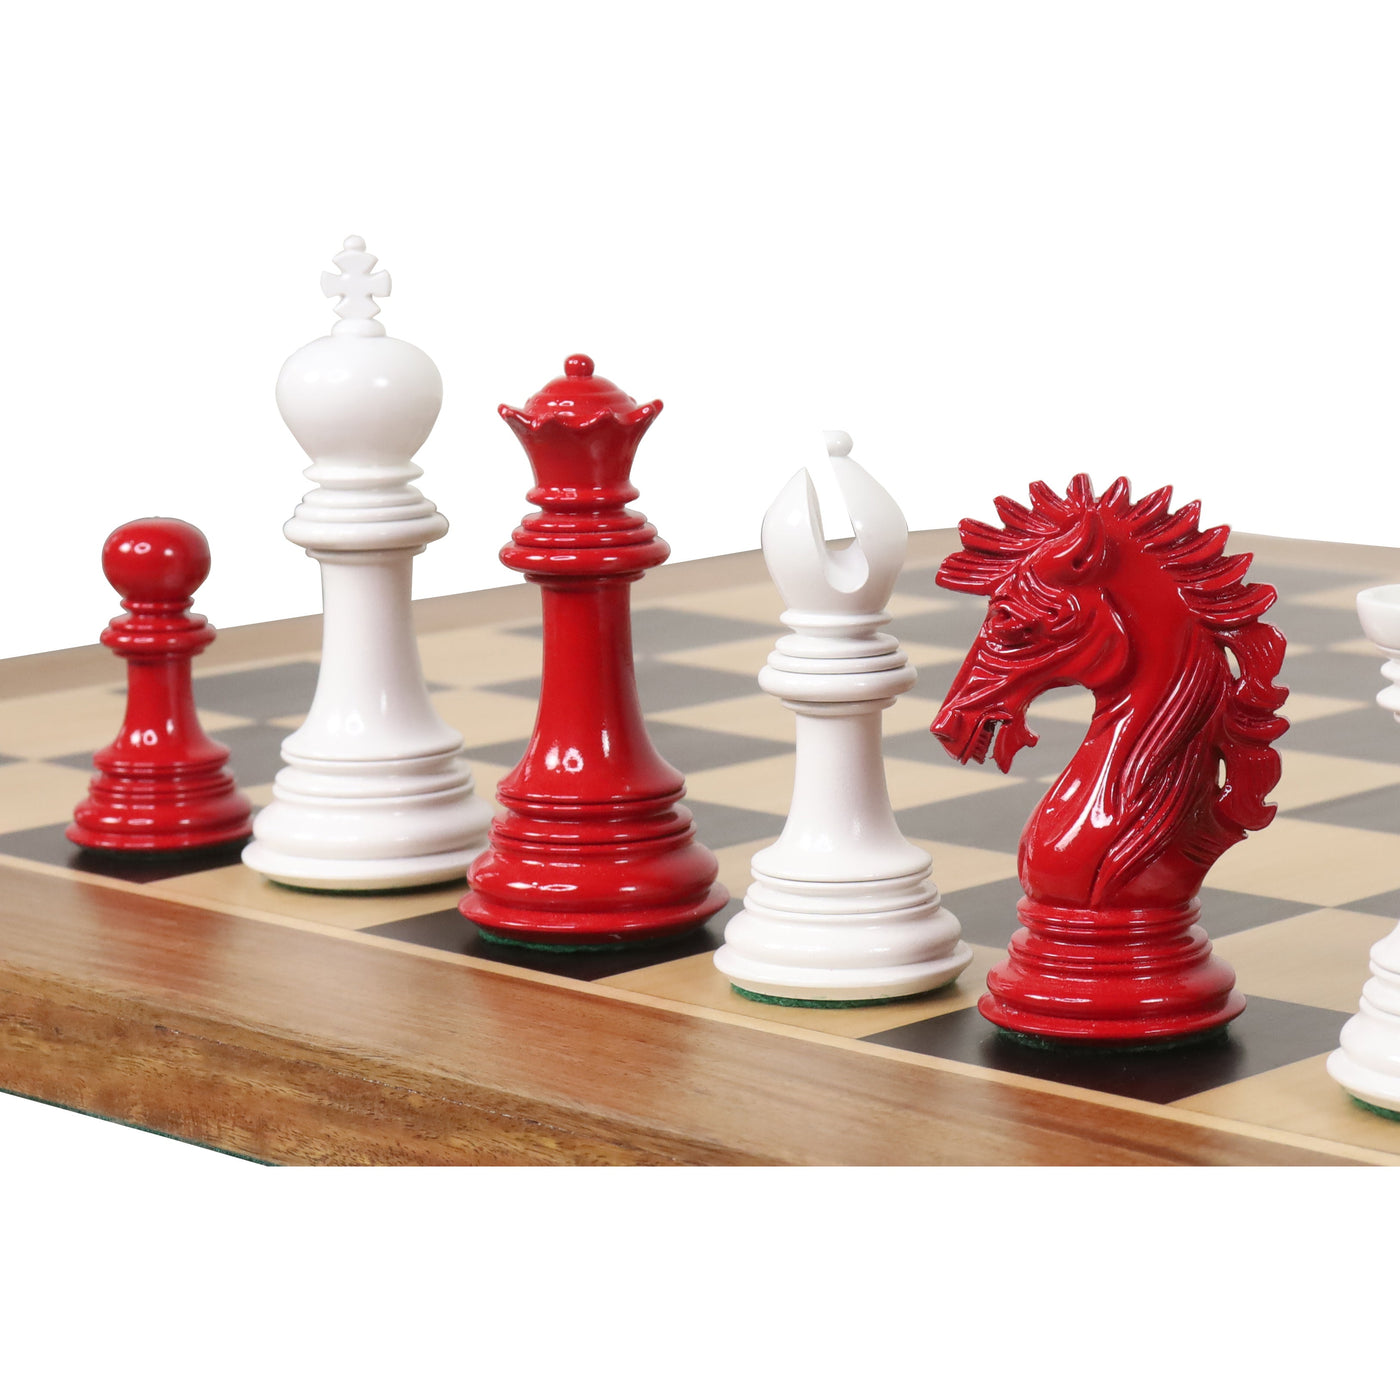 Slightly imperfect 4.6" Mogul Staunton Luxury Chess Set - Chess Pieces Only - White & Red Lacquered Boxwood